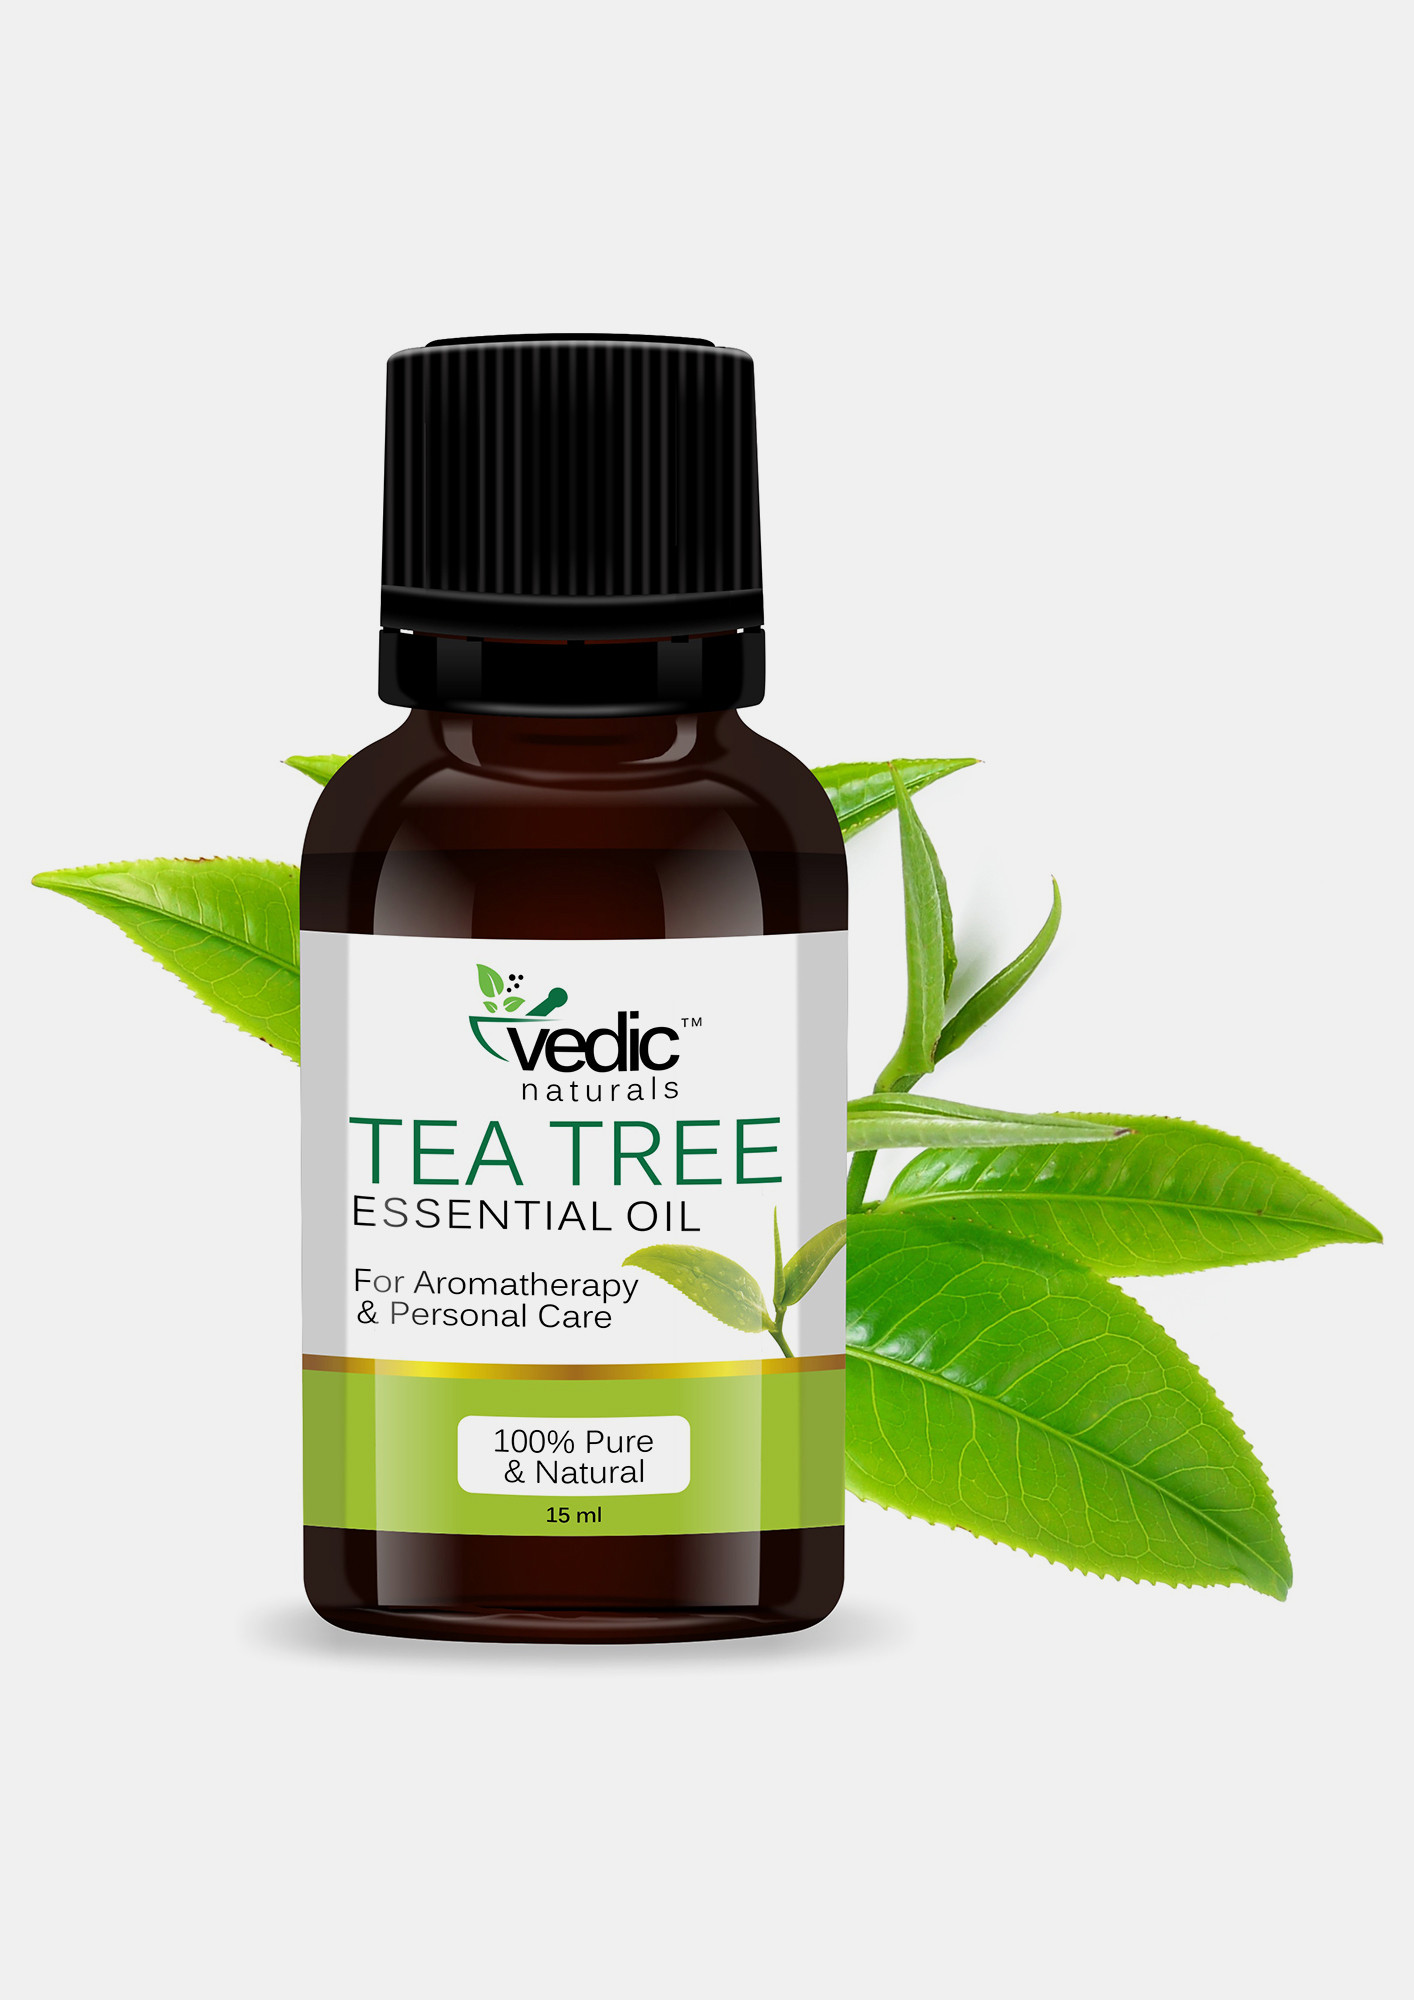 Organic Tea Tree Oil 30 ml - 100% Natural, Pure Essential Oil for Hair,  Face, Skin Use, Scalp, Acne - Essential Oils for Aromatherapy, Diffuser